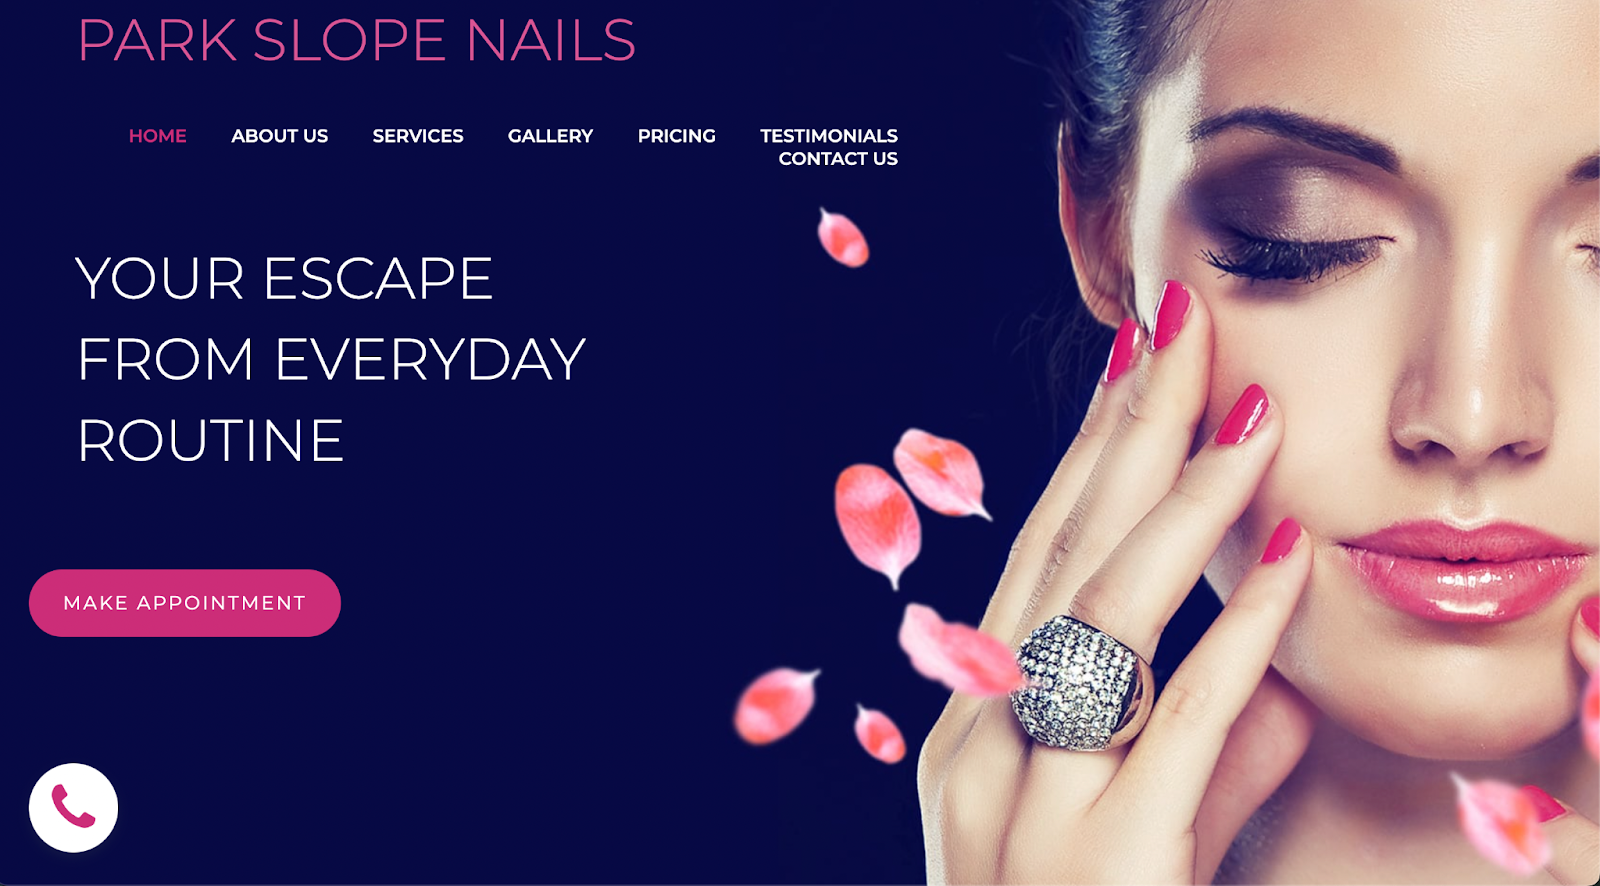 Best nail salon websites, example from Park Slope Nails.